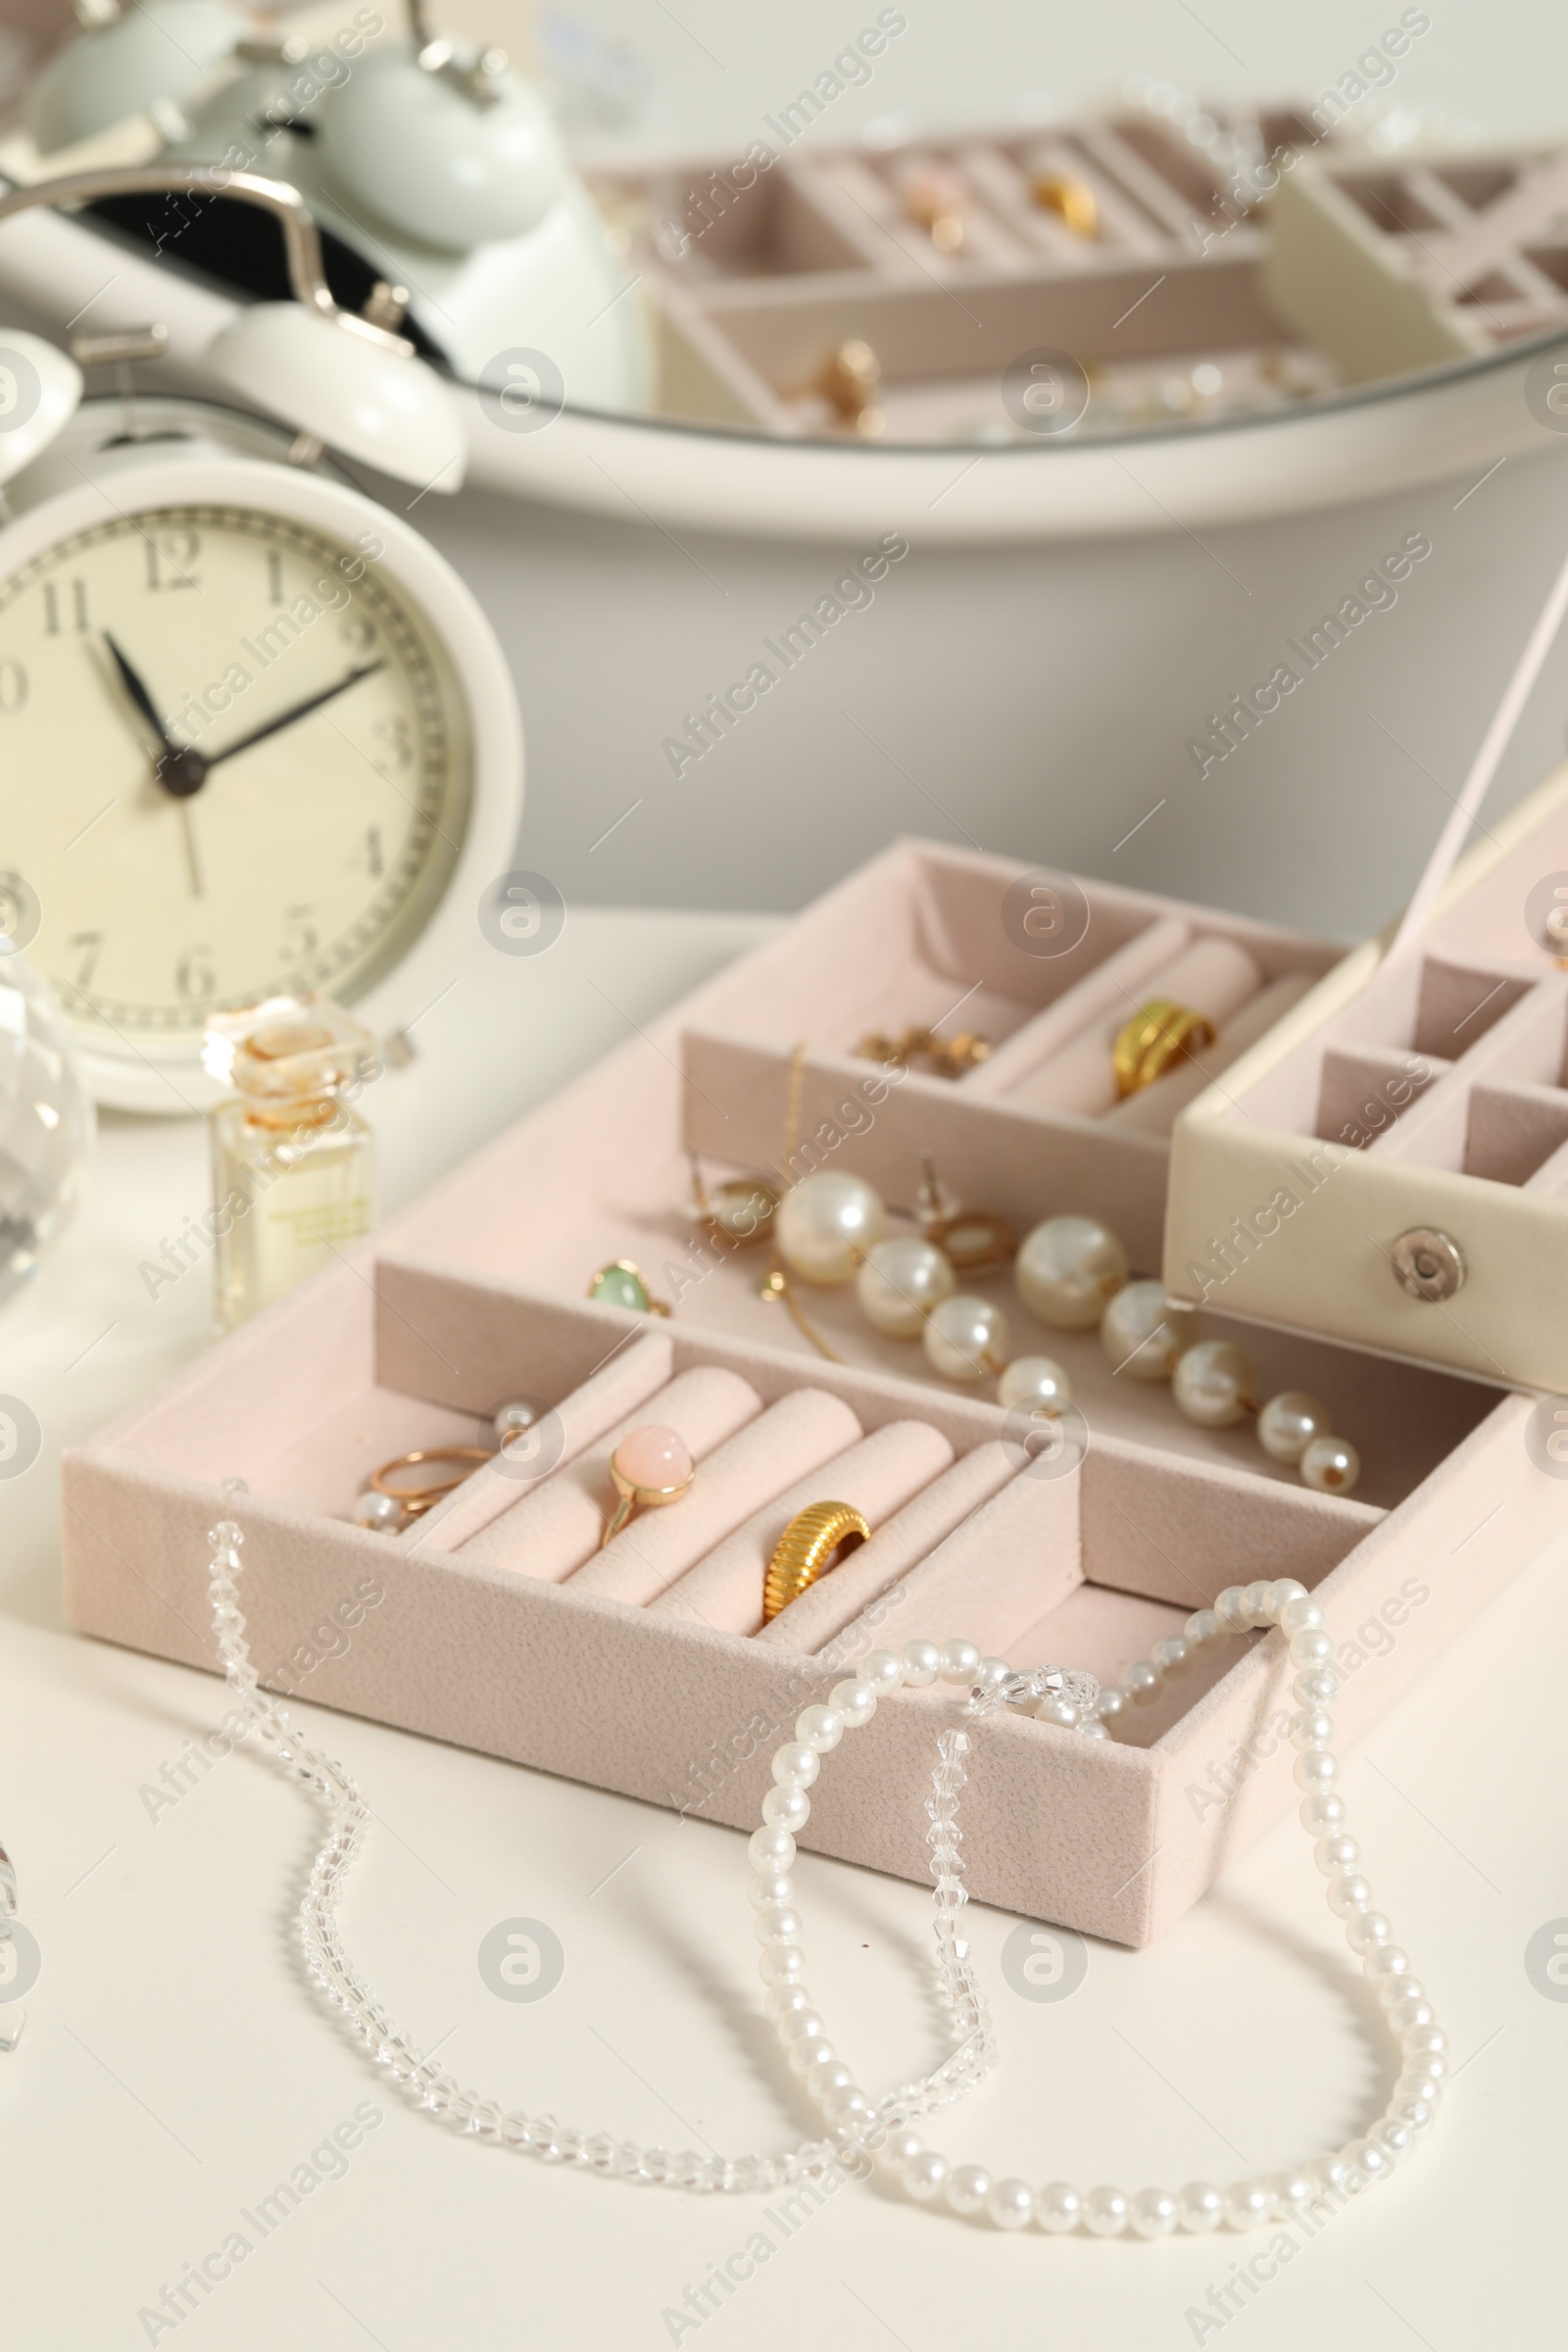 Photo of Jewelry boxes with many different accessories, perfume and alarm clock on white table